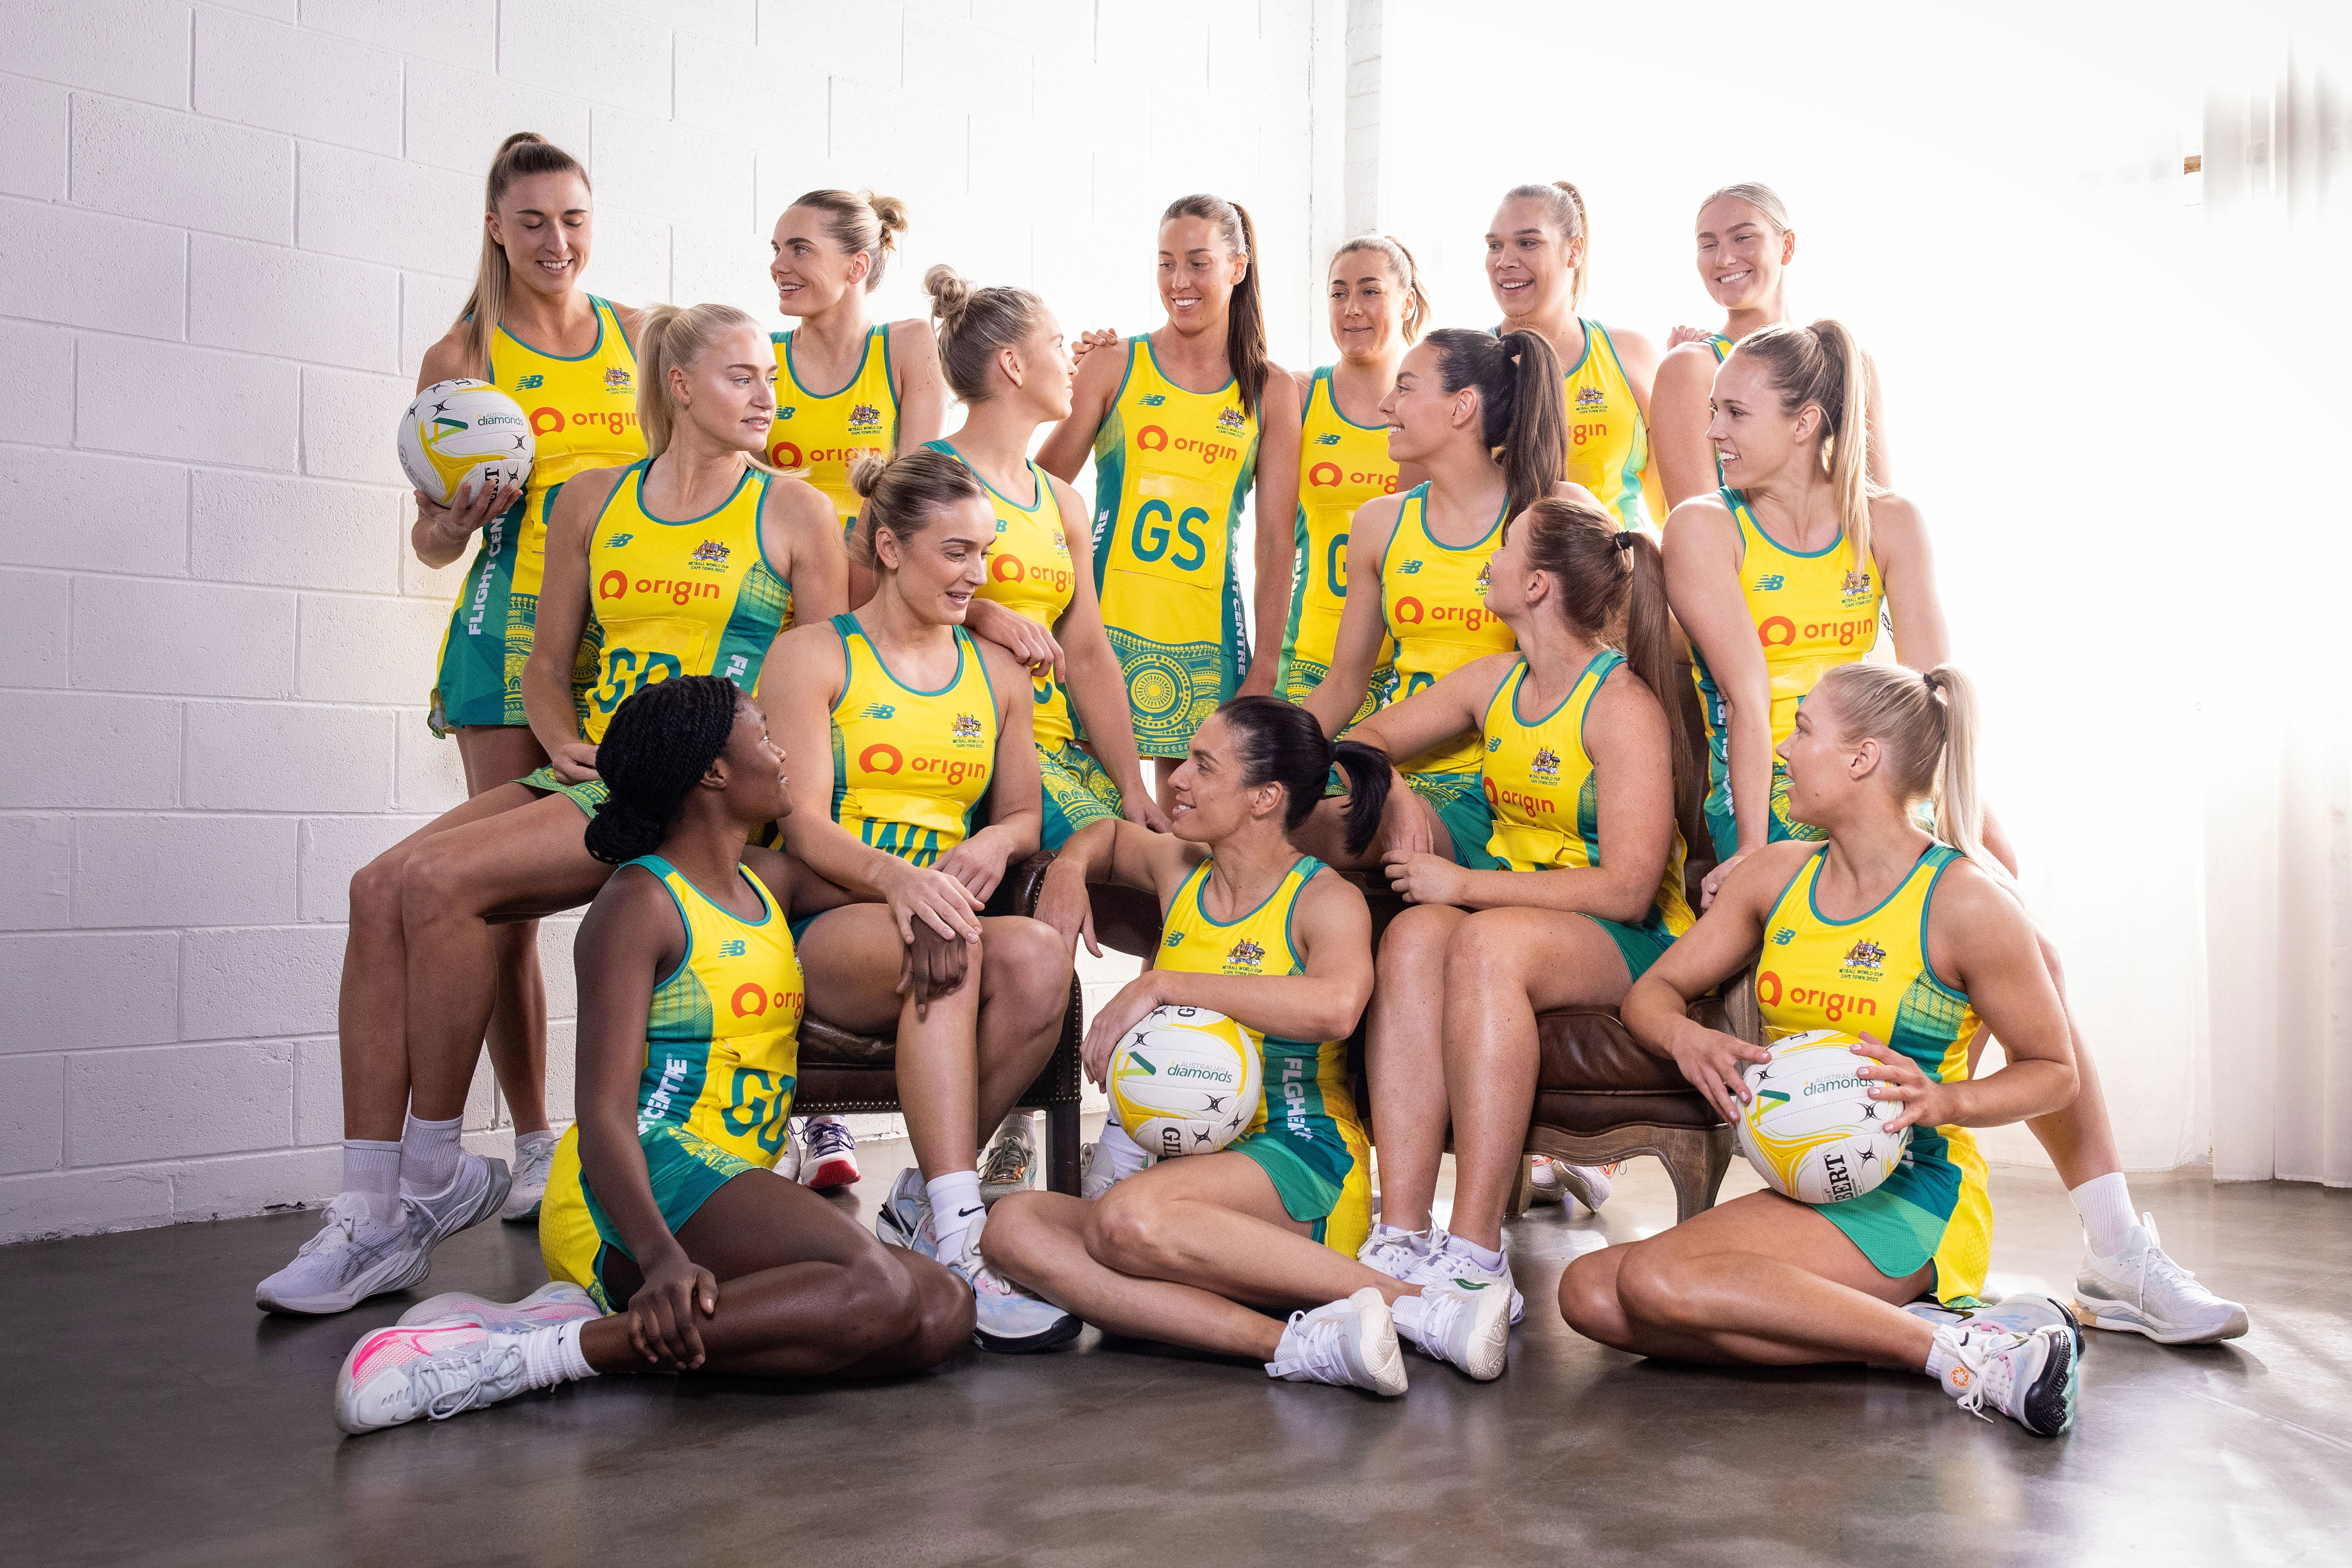 why ugly netball dispute is years in the making